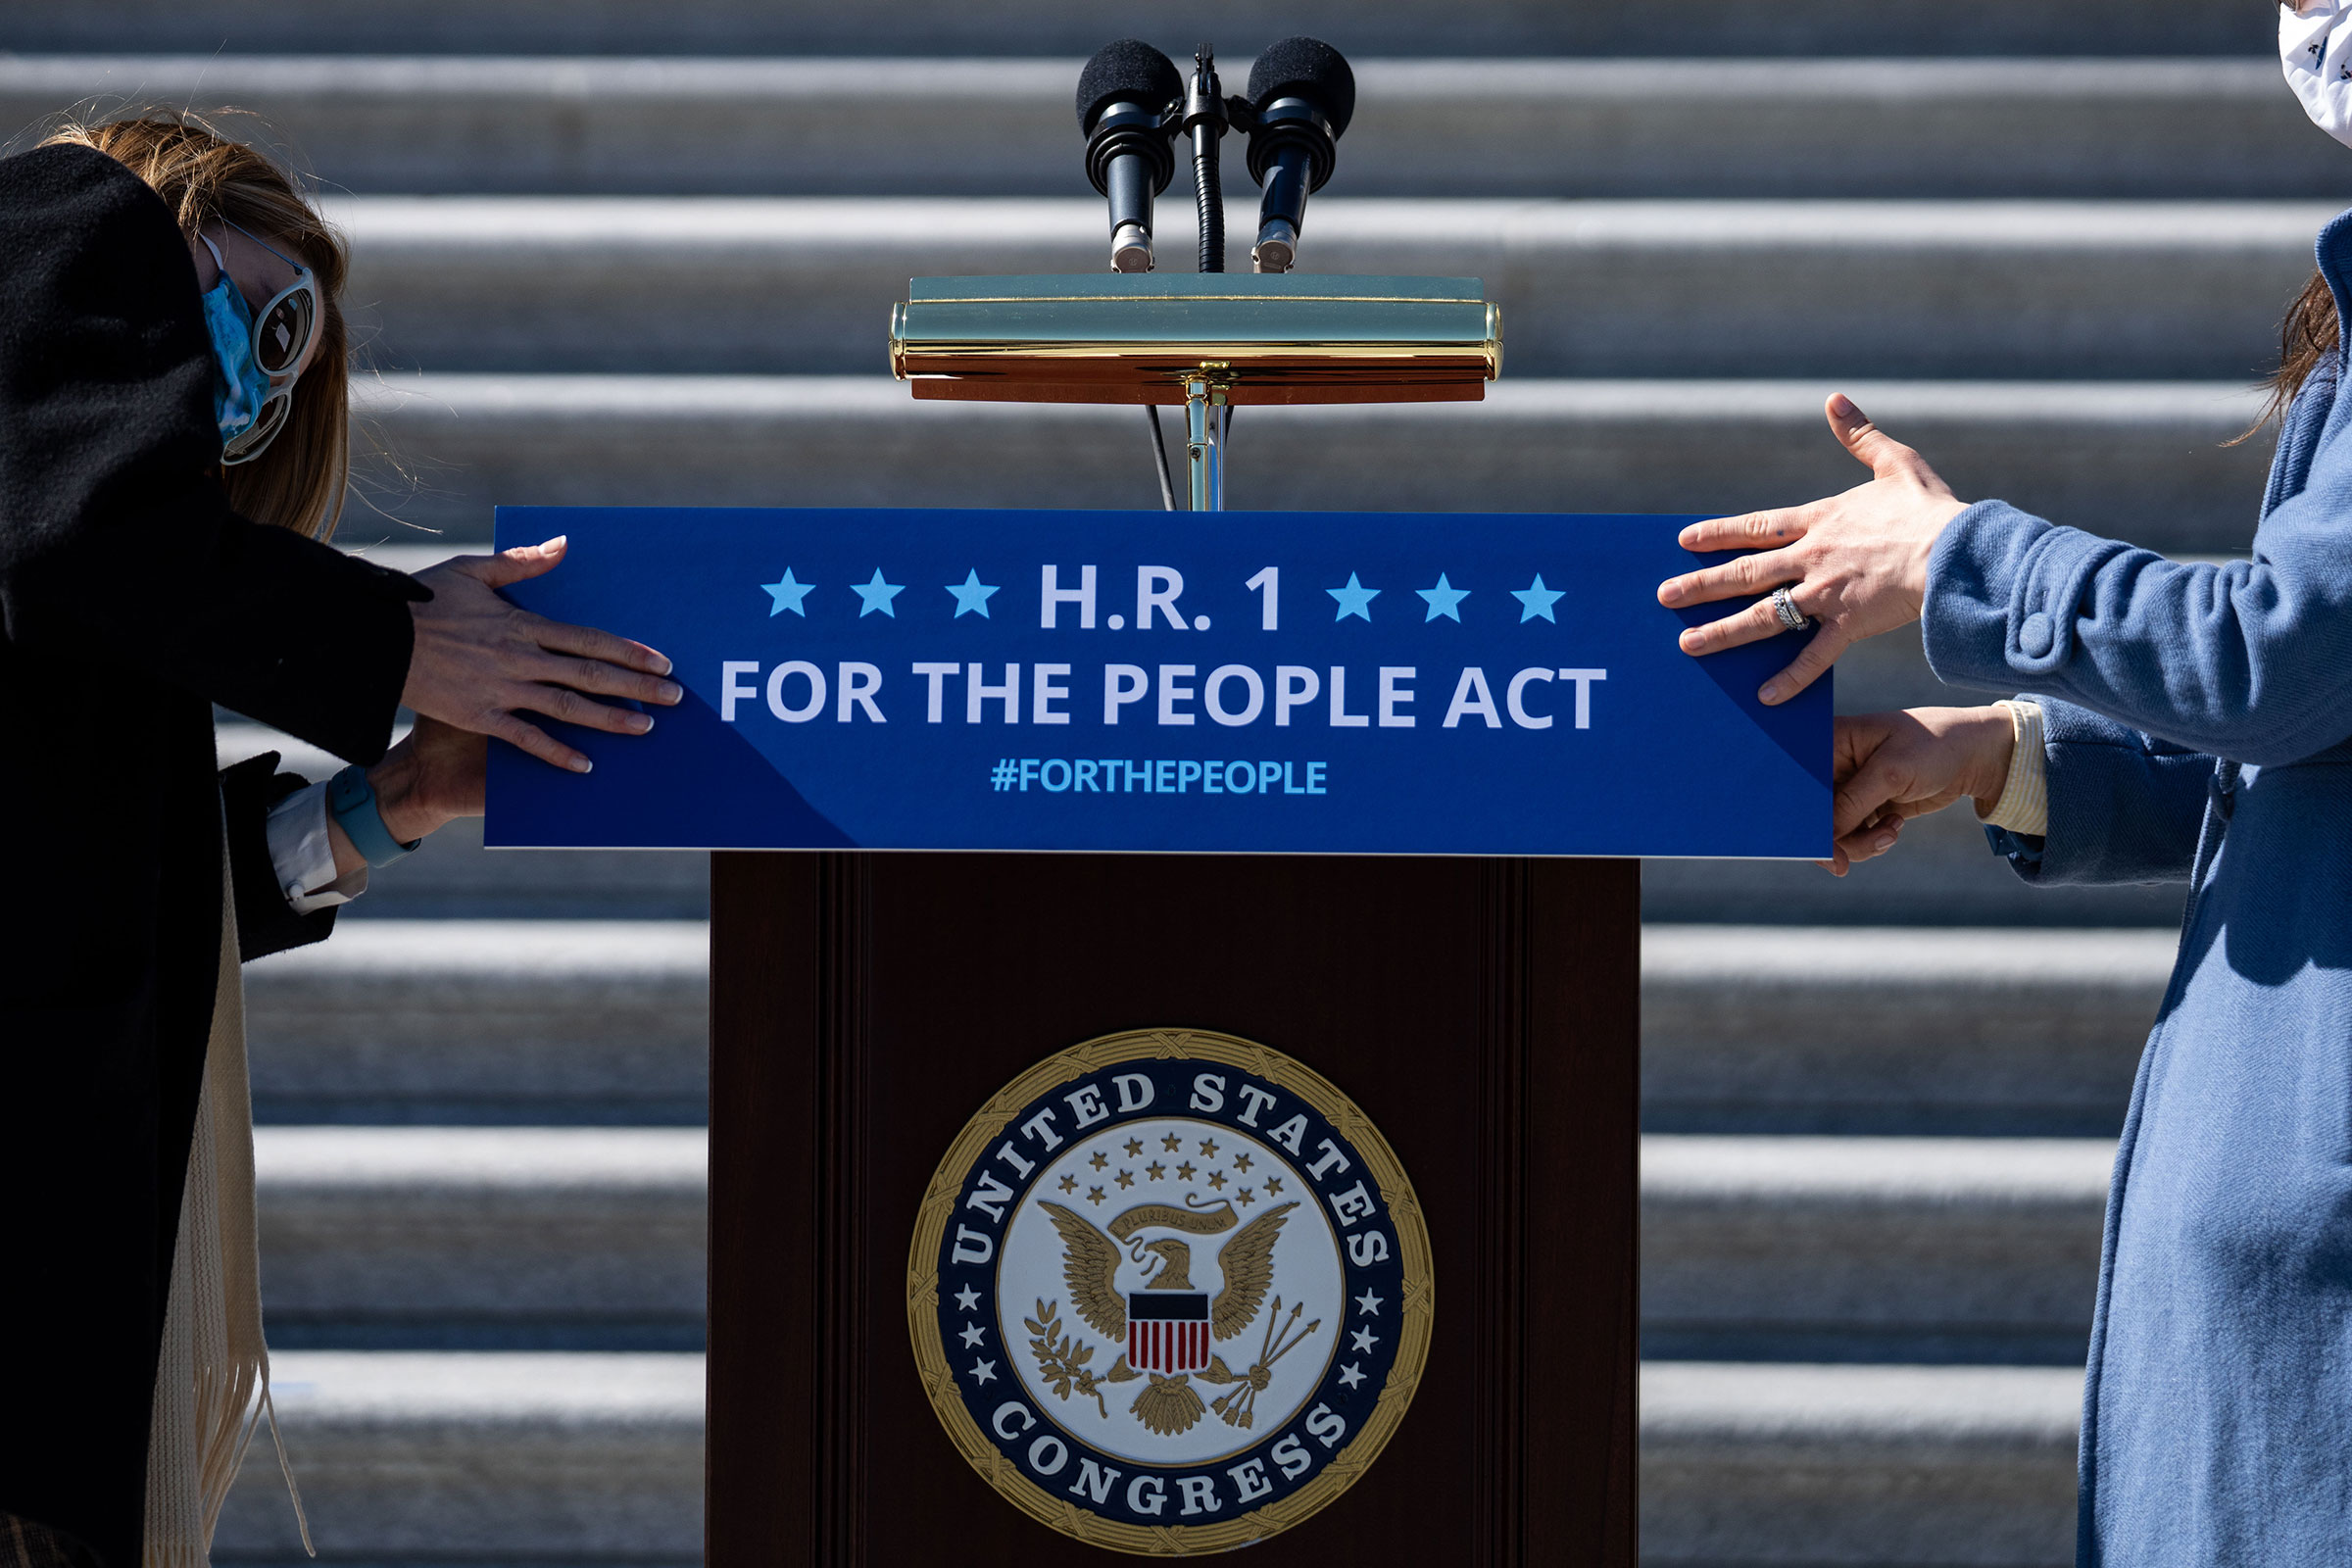 Staffers place a sign on a podium in preparation for a news conference with House Democrats regarding H.R. 1, the For the People Act, on Capitol Hill on March 3, 2021. (Kent Nishimura—Los Angeles Times/Shutterstock)